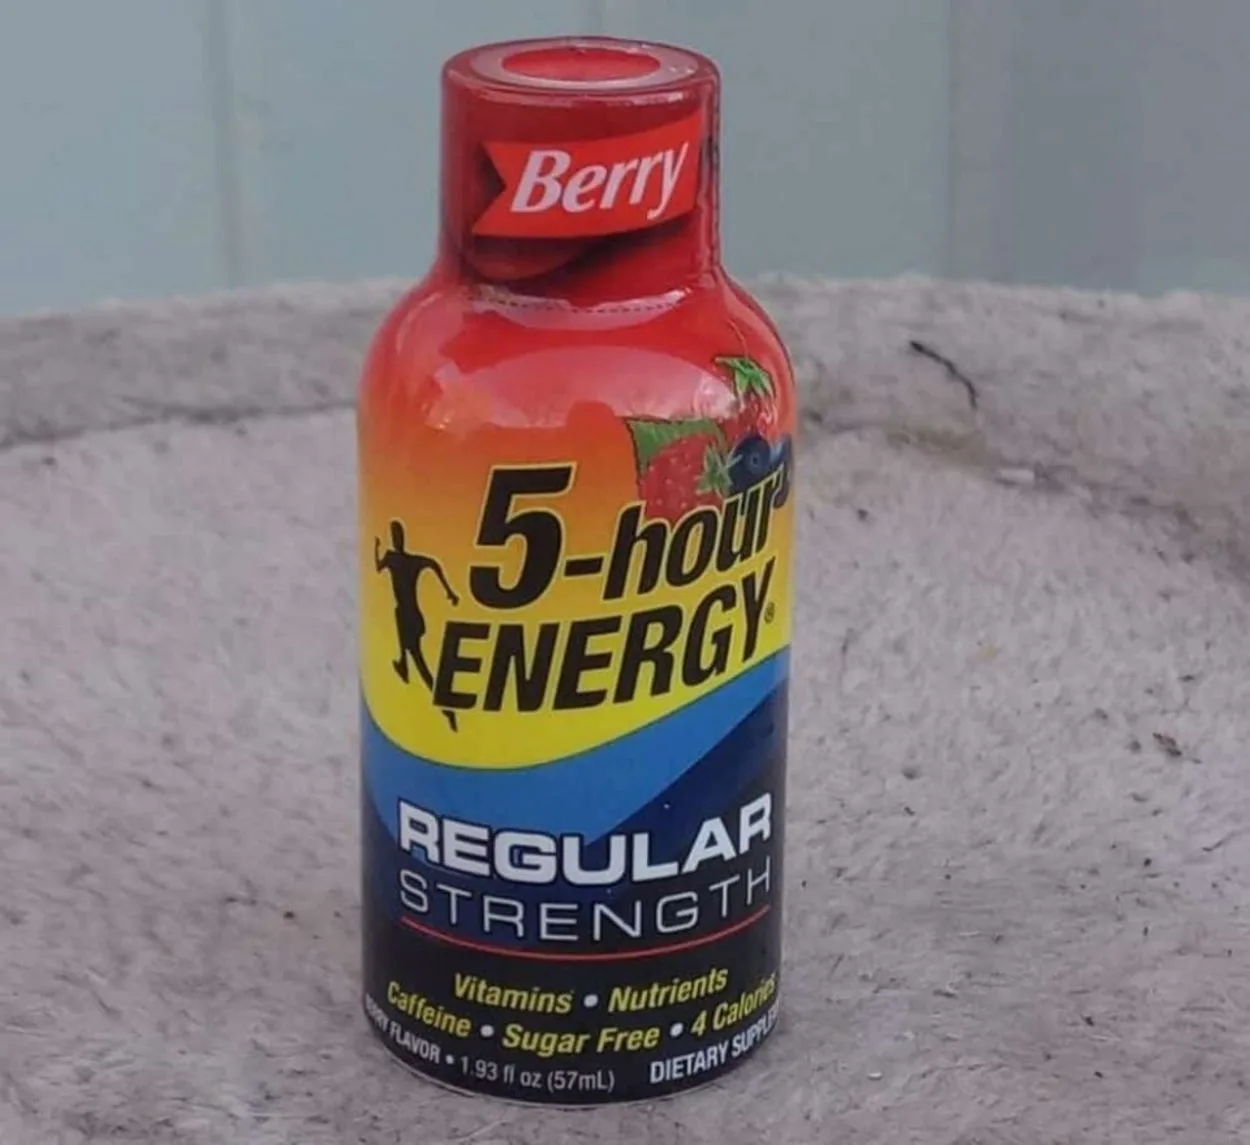 A bottle of 5-Hour Energy Drink.